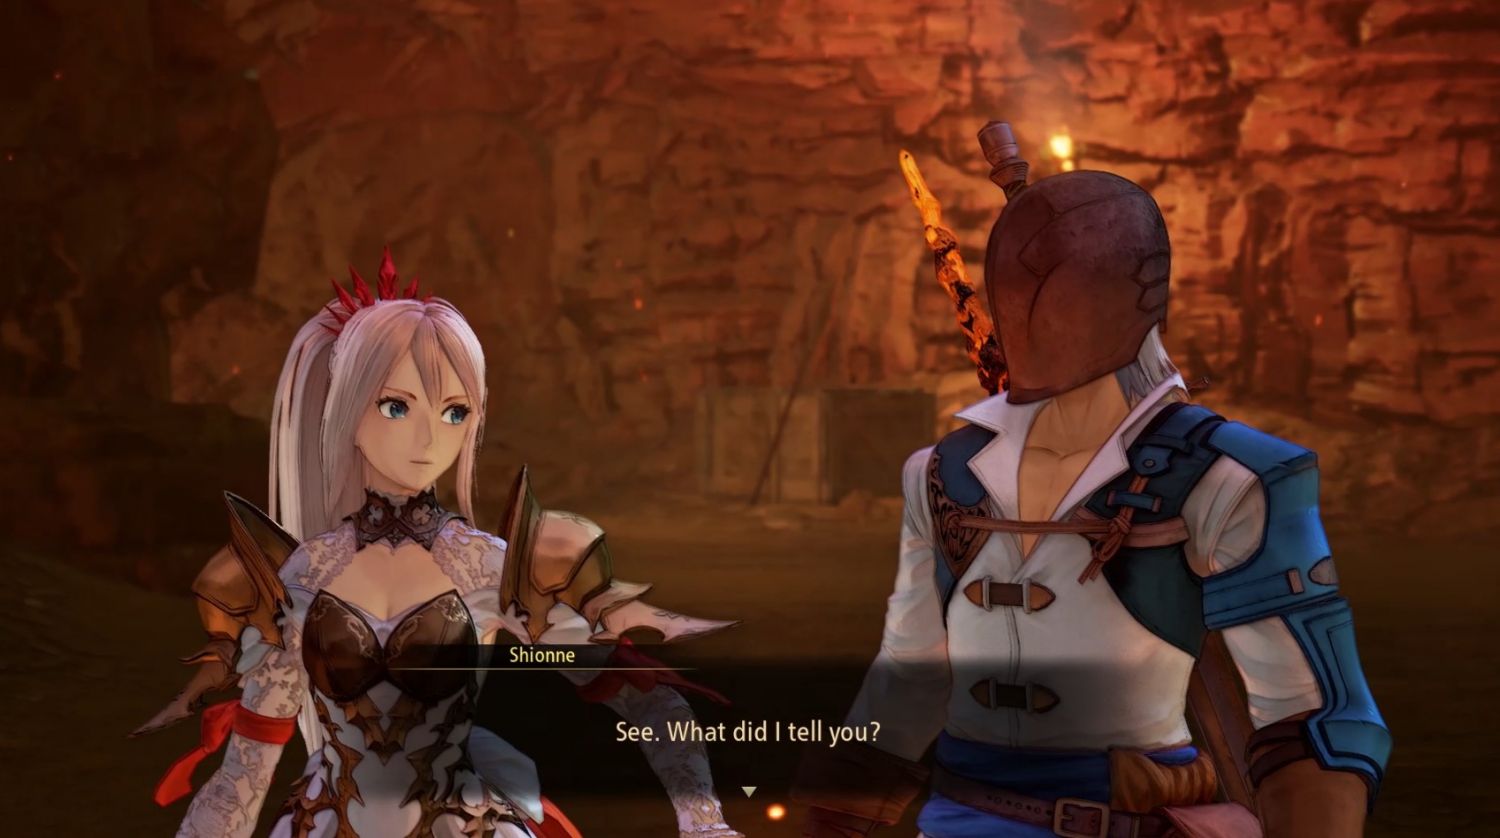 Geek Preview: Tales of Arise - Shionne and Alphen